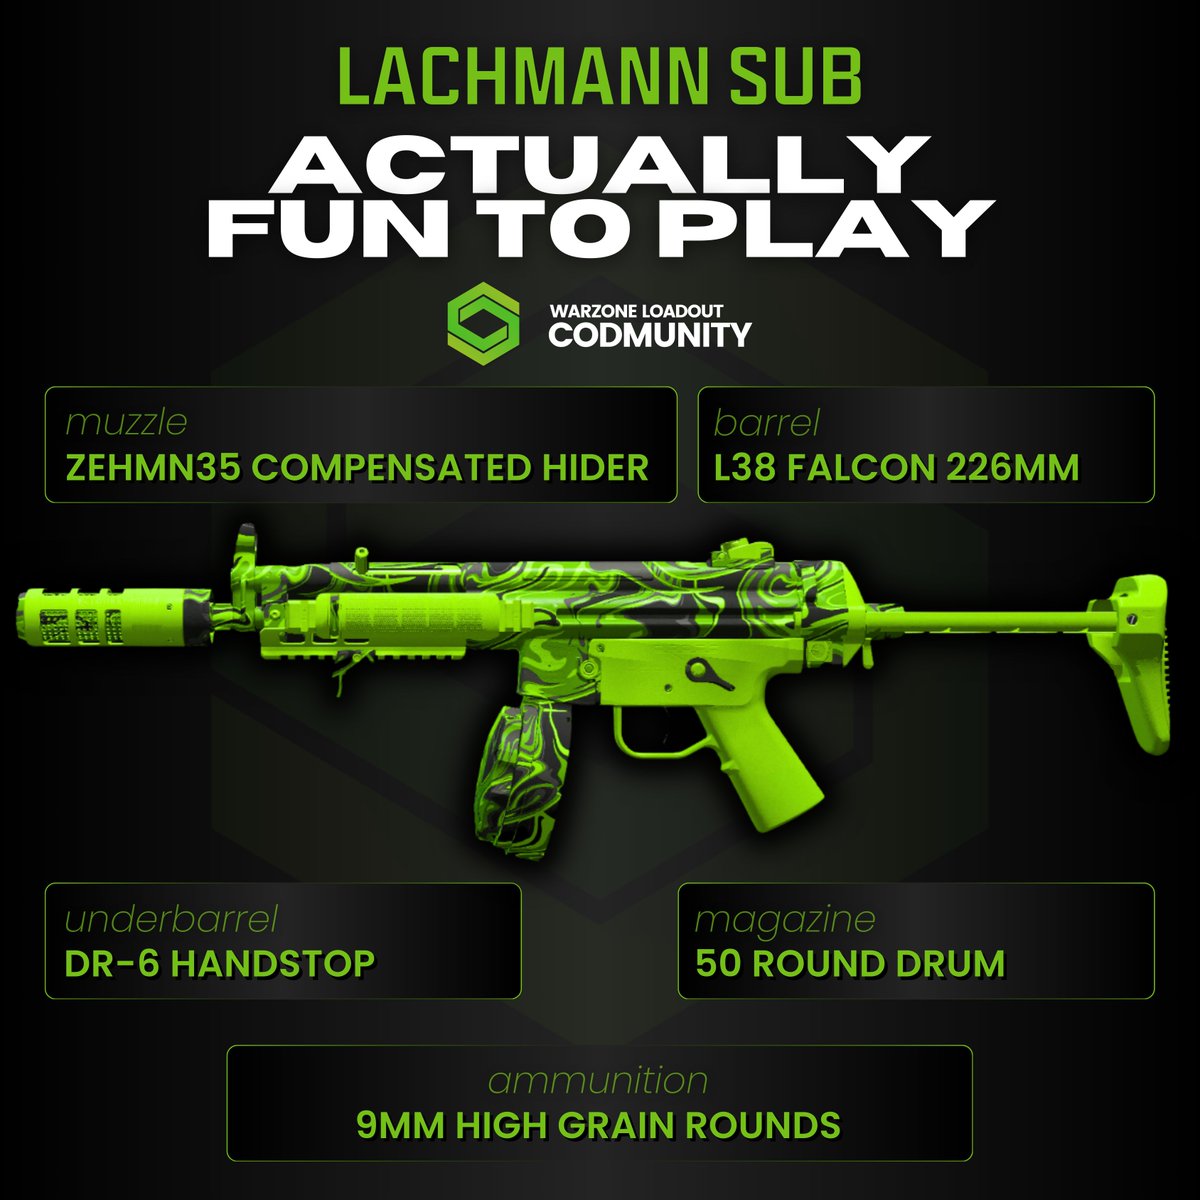 The Lachmann Sub (MP5) is surprisingly good and fun to play with in Season 3! It was slightly buffed and is now a viable option for #Warzone Modern Warfare 3 attachments on it are also improving it a lot compared to the old Warzone 2 build!